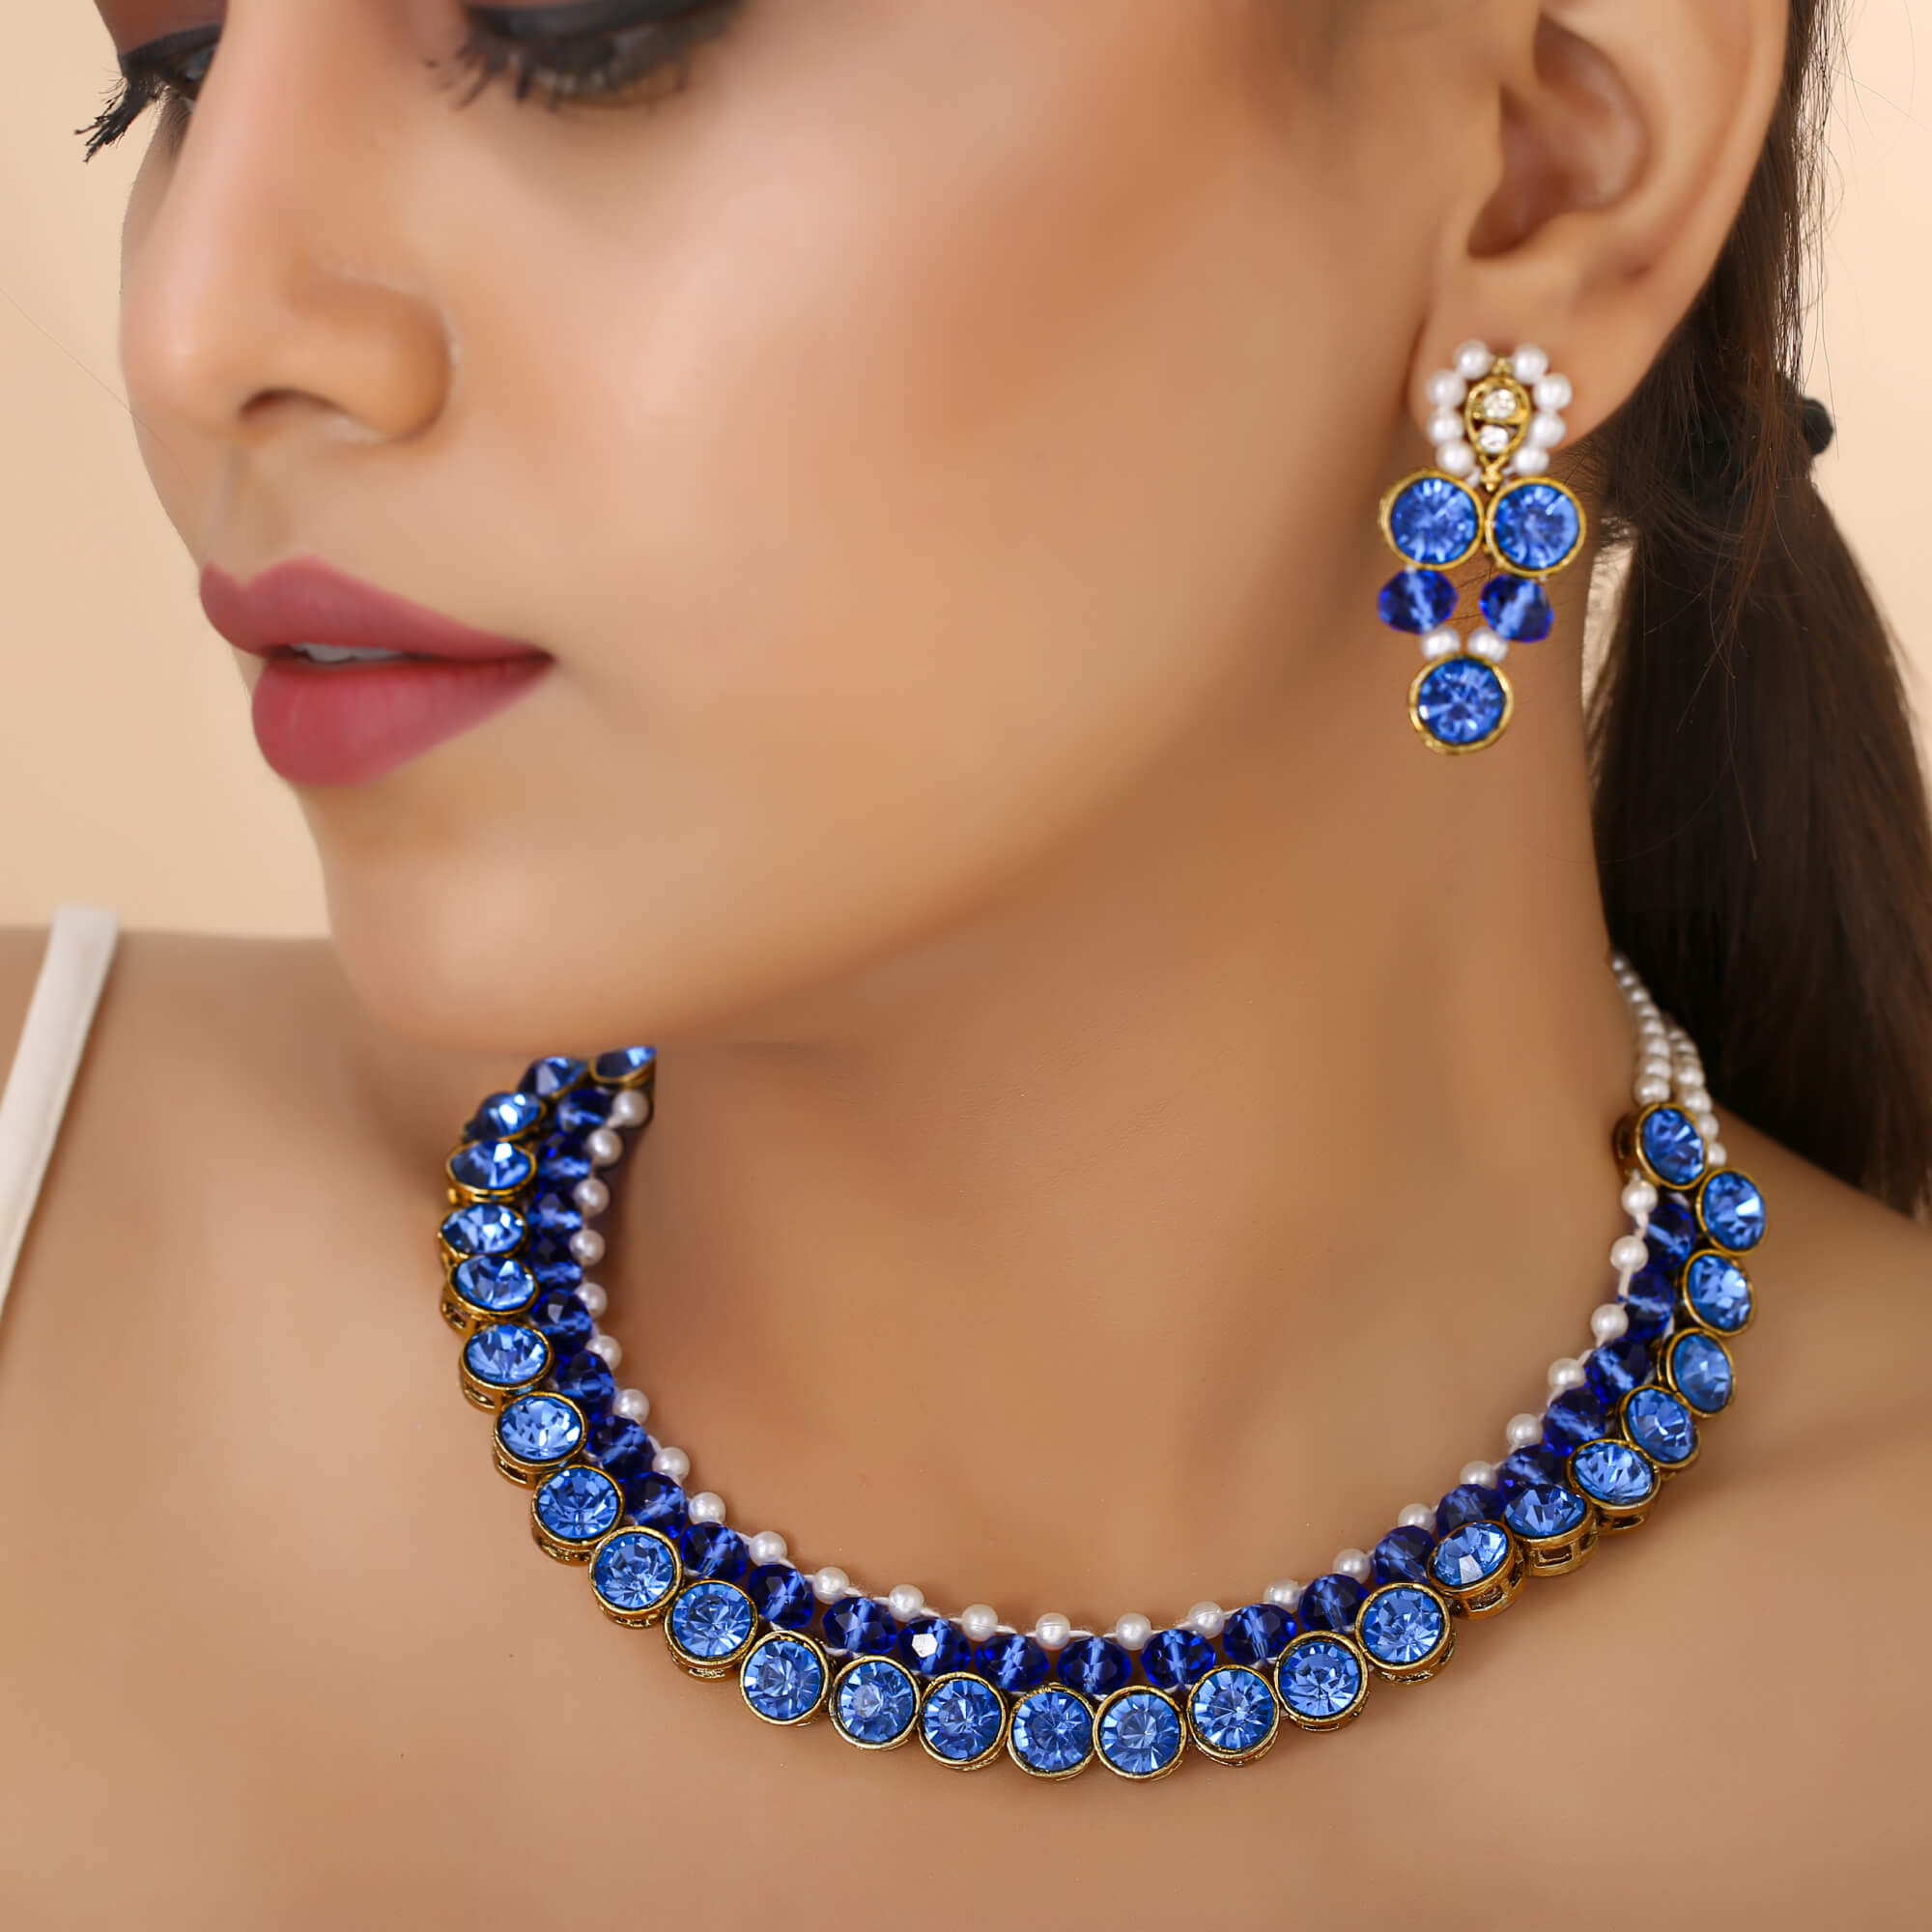 Modern statement agate blue stone necklace and earrings set at ₹1950 |  Azilaa